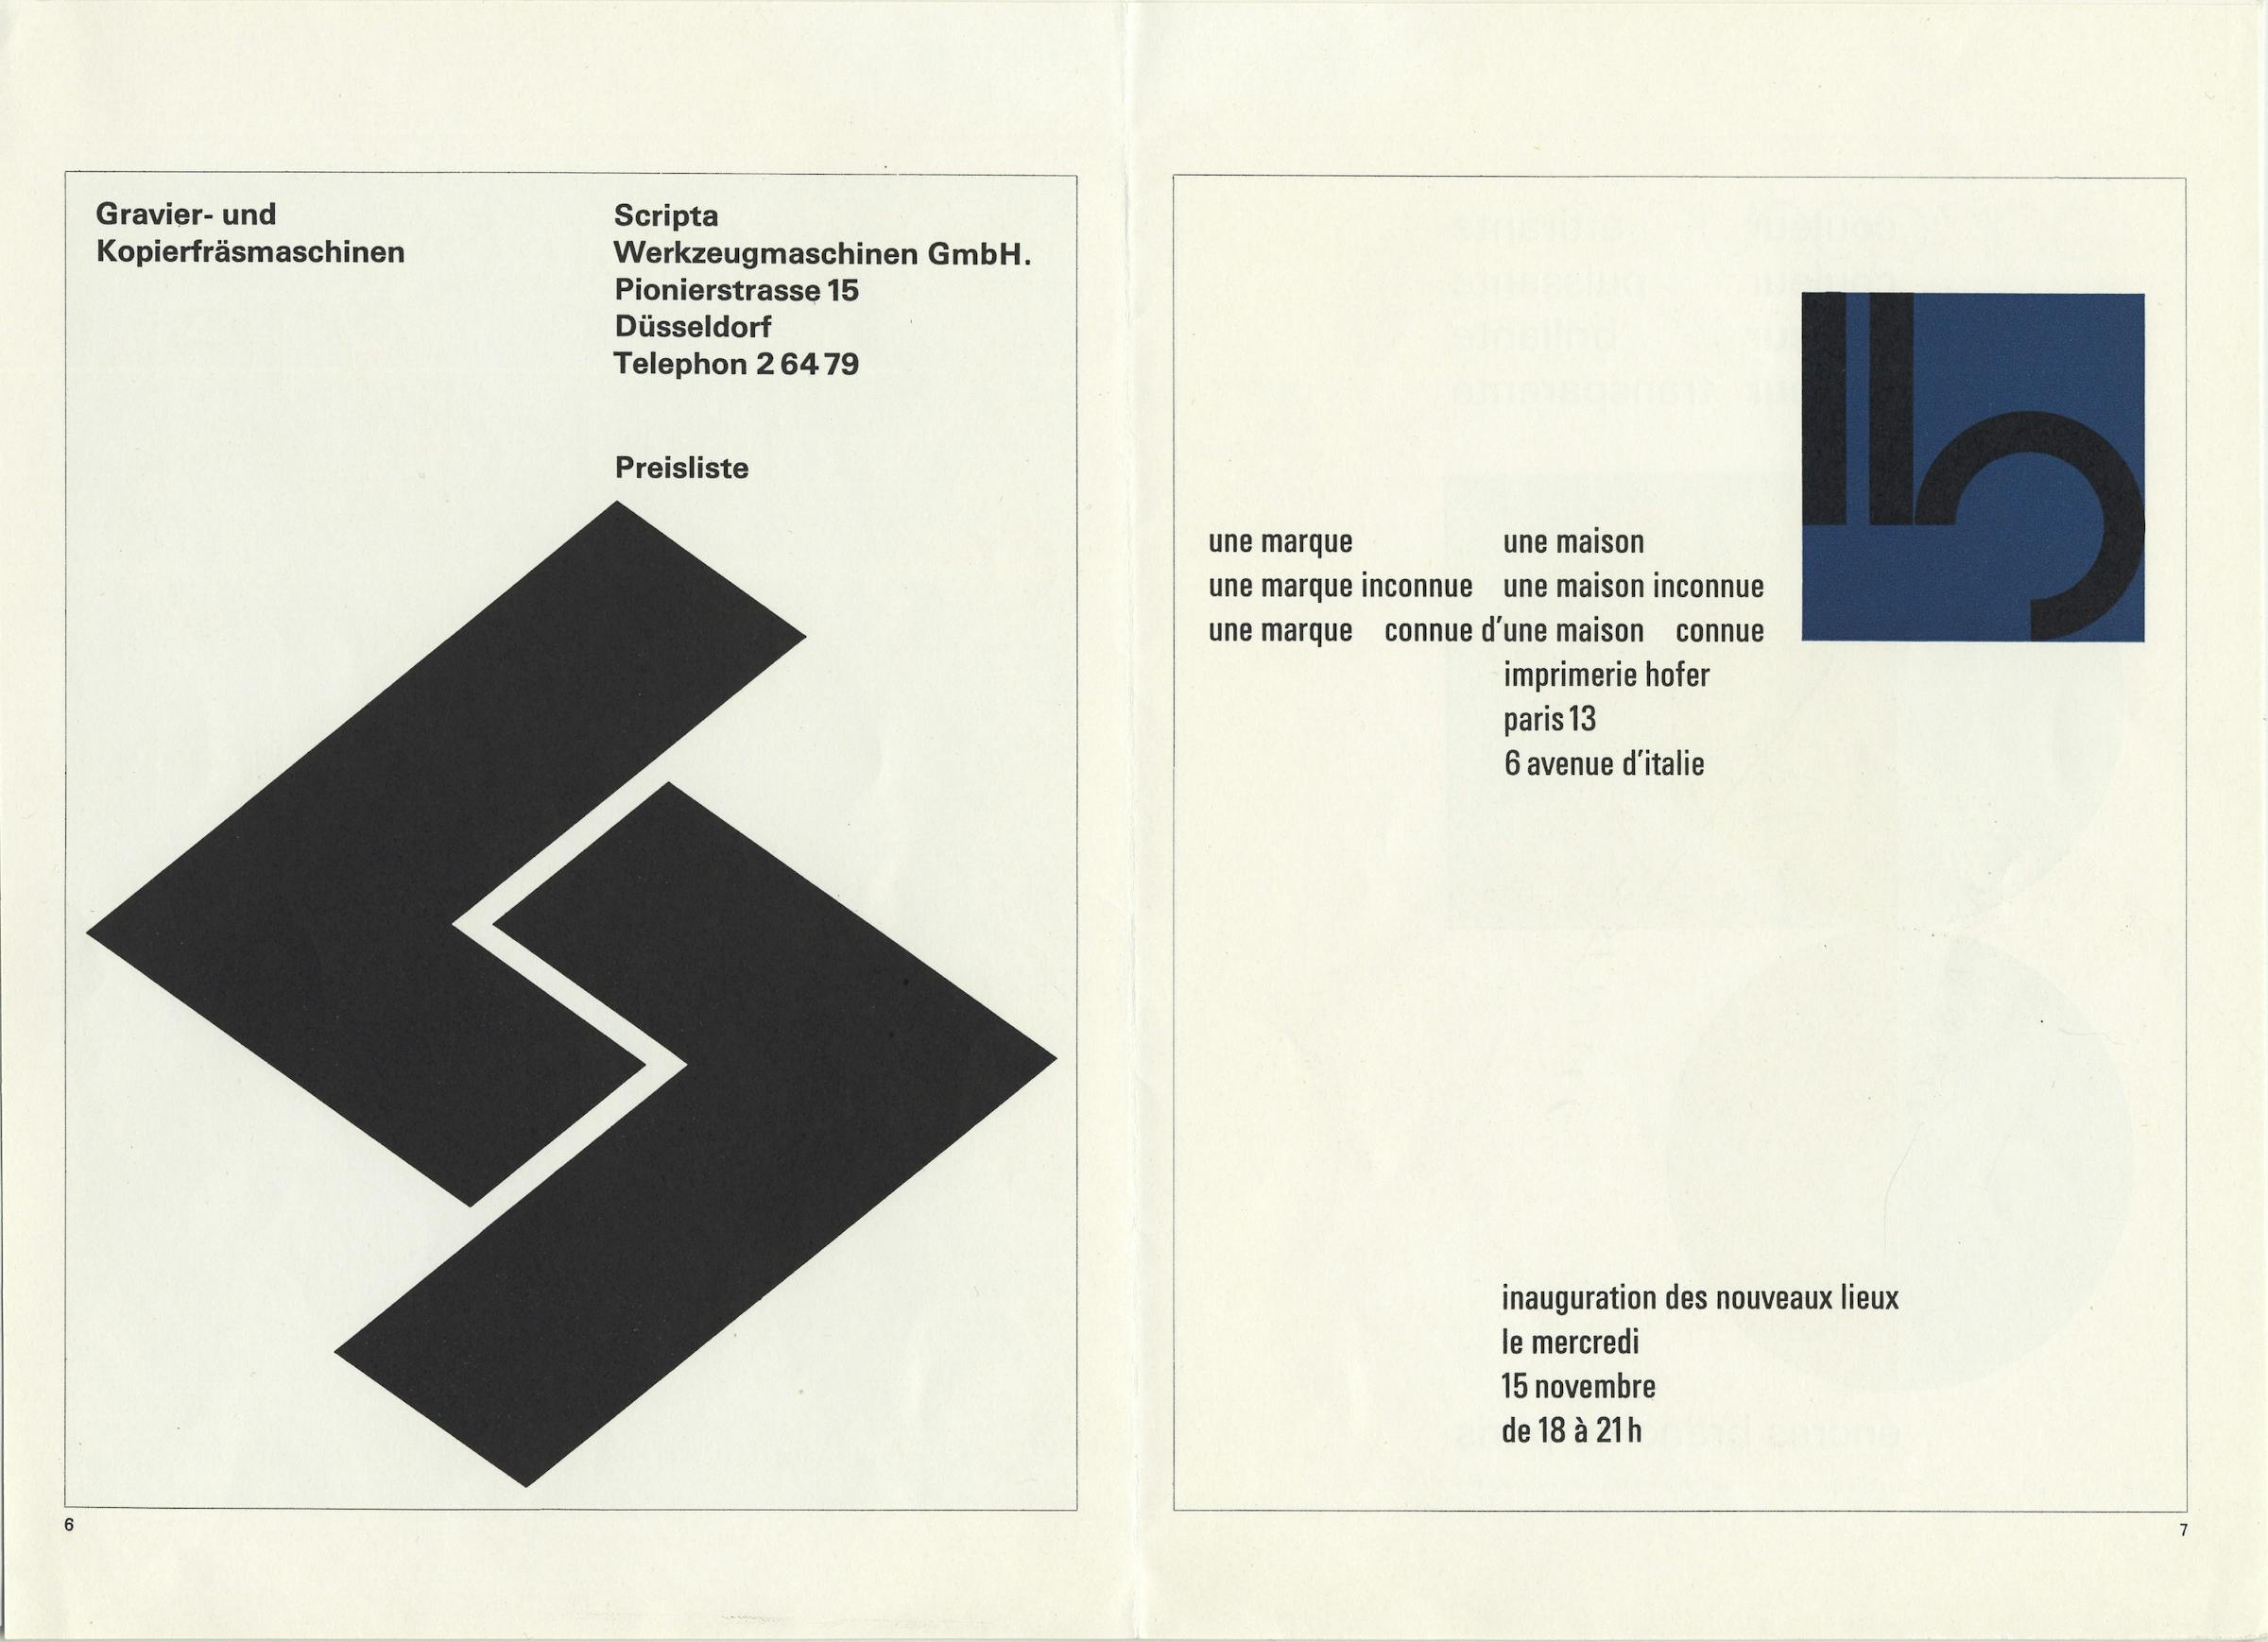 Atelier Adrian Frutiger, Paris: Brands & typography, the fusion of design and corporate identity in the 1960s